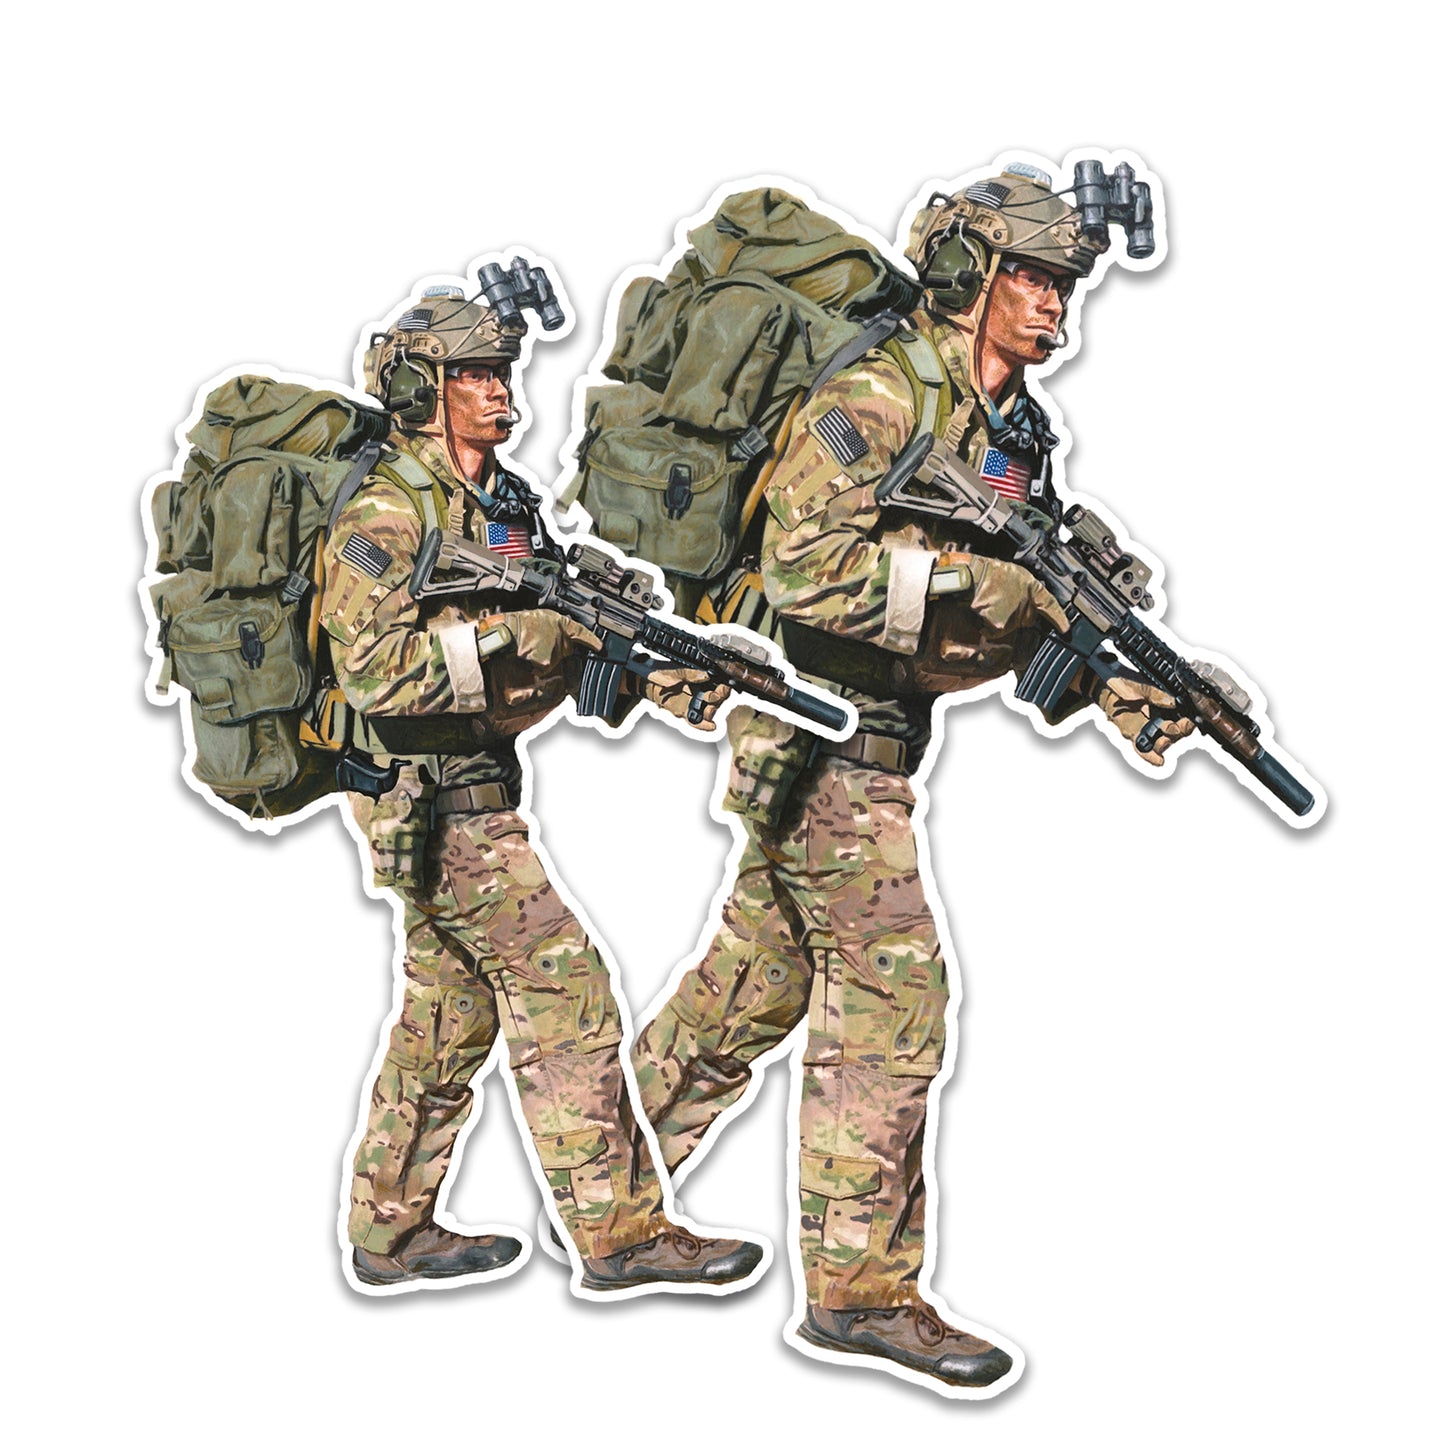 "The Quiet Professional" Special Forces Art Print (Triple Canopy)